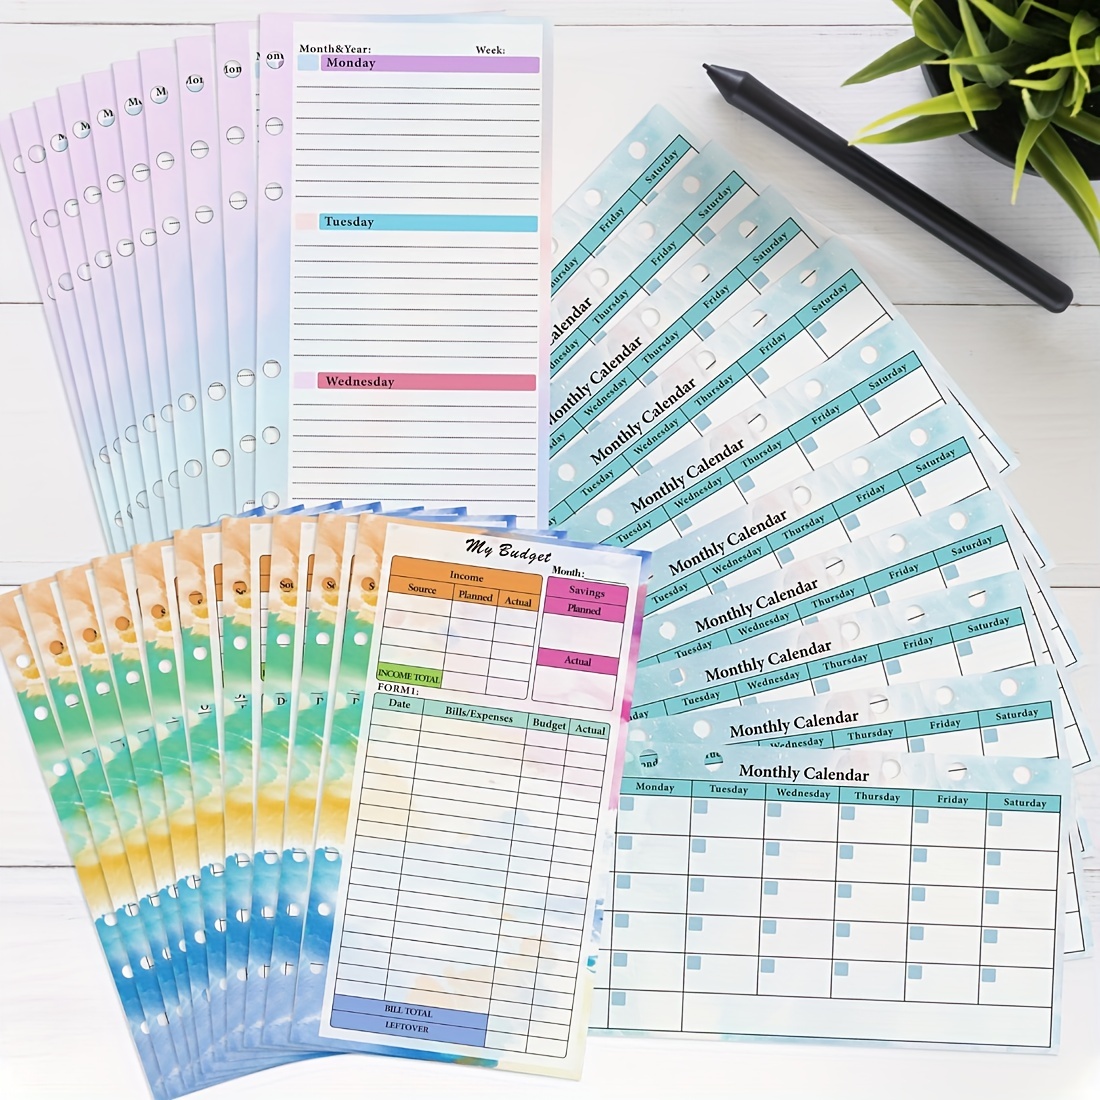 Printed Personal size Contacts & Address planner inserts | 10 double sided  pages | for medium Kikki K or Filofax | planner refill MM agenda